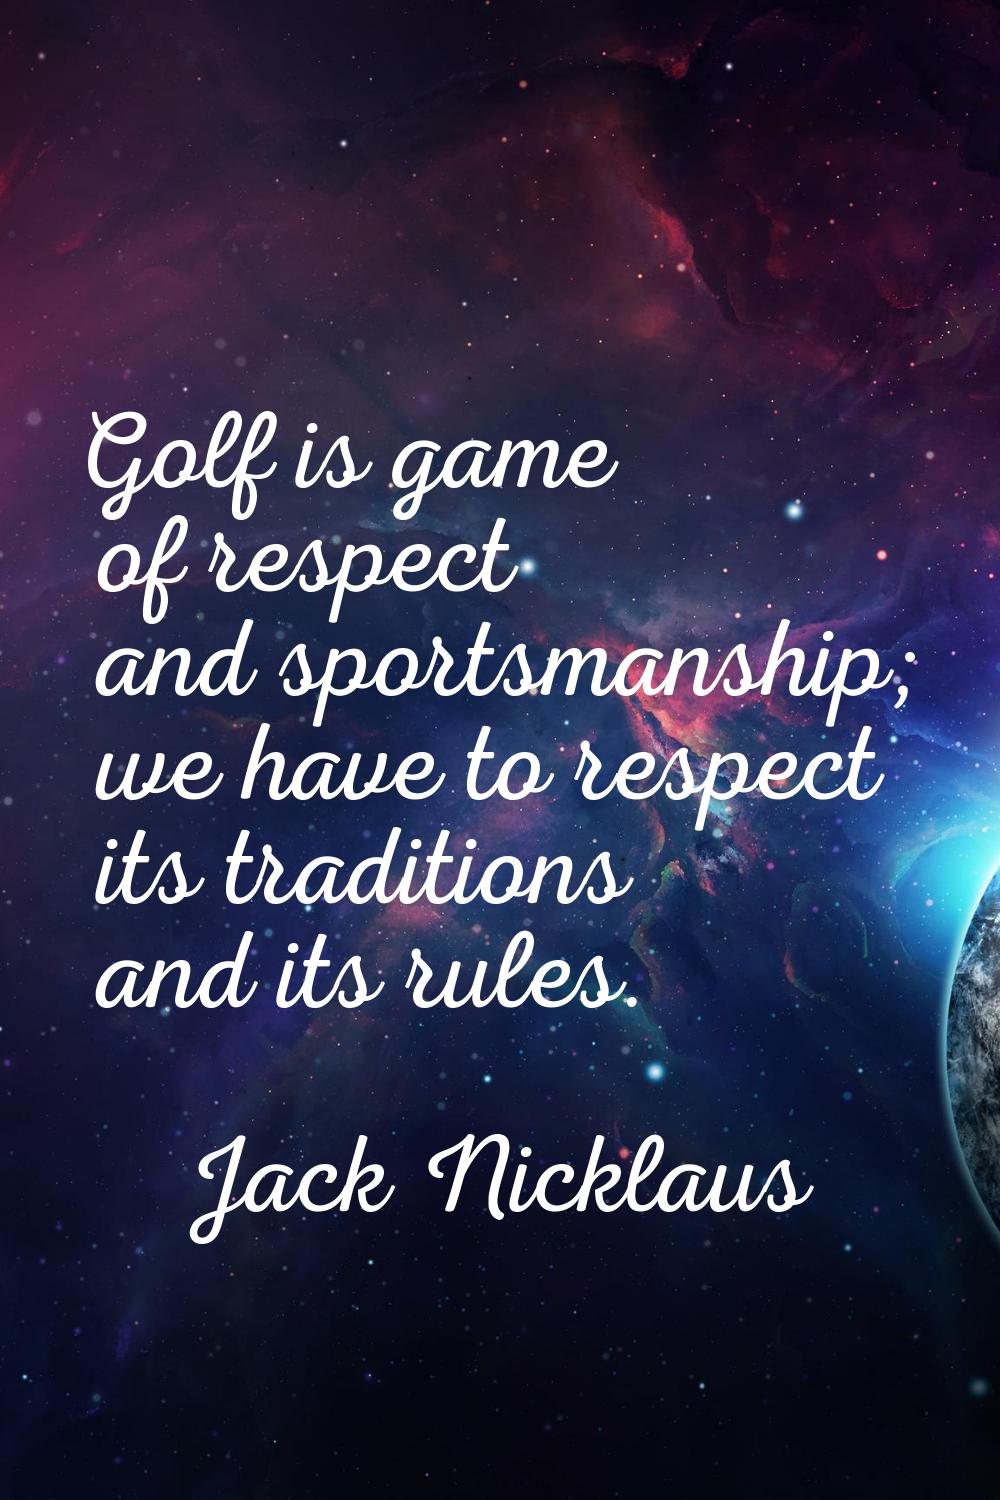 Golf is game of respect and sportsmanship; we have to respect its traditions and its rules.